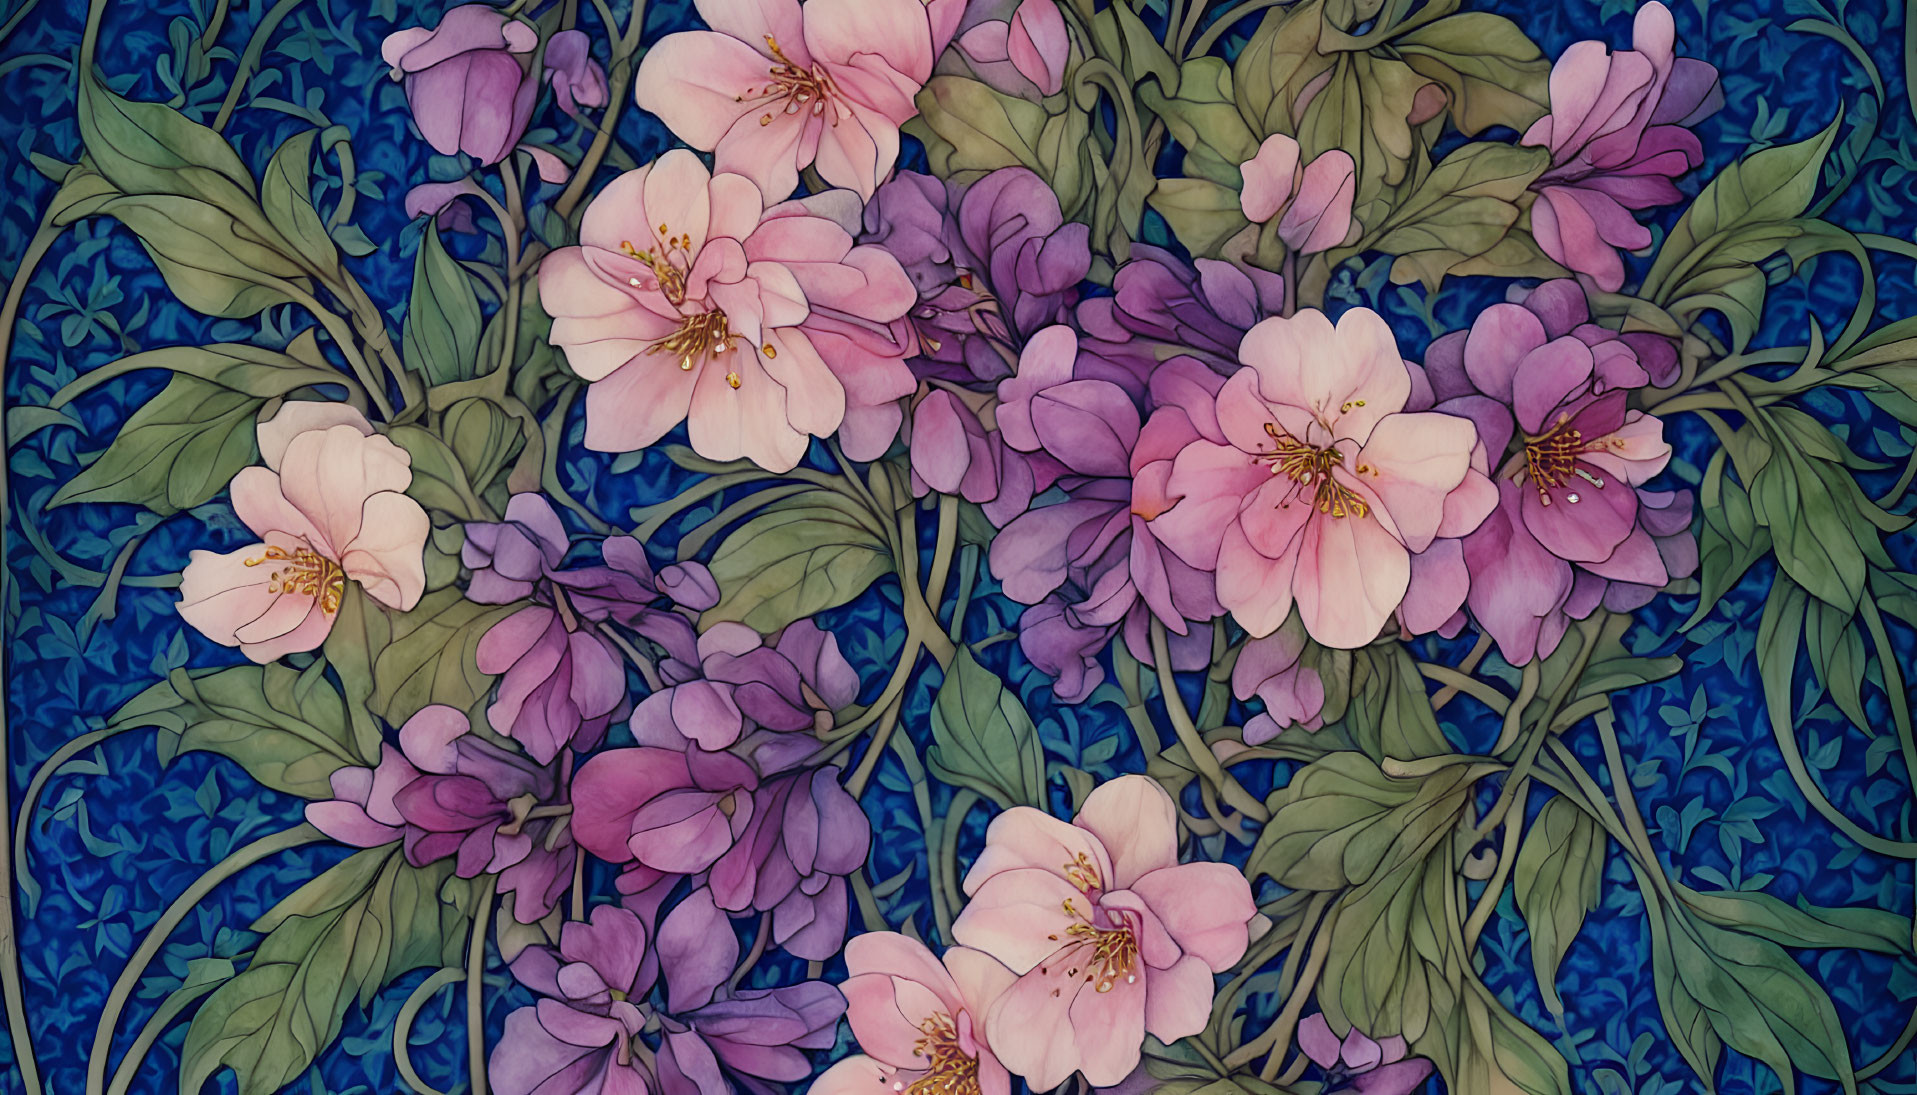 Detailed botanical illustration of pink flowers and green foliage on textured blue background